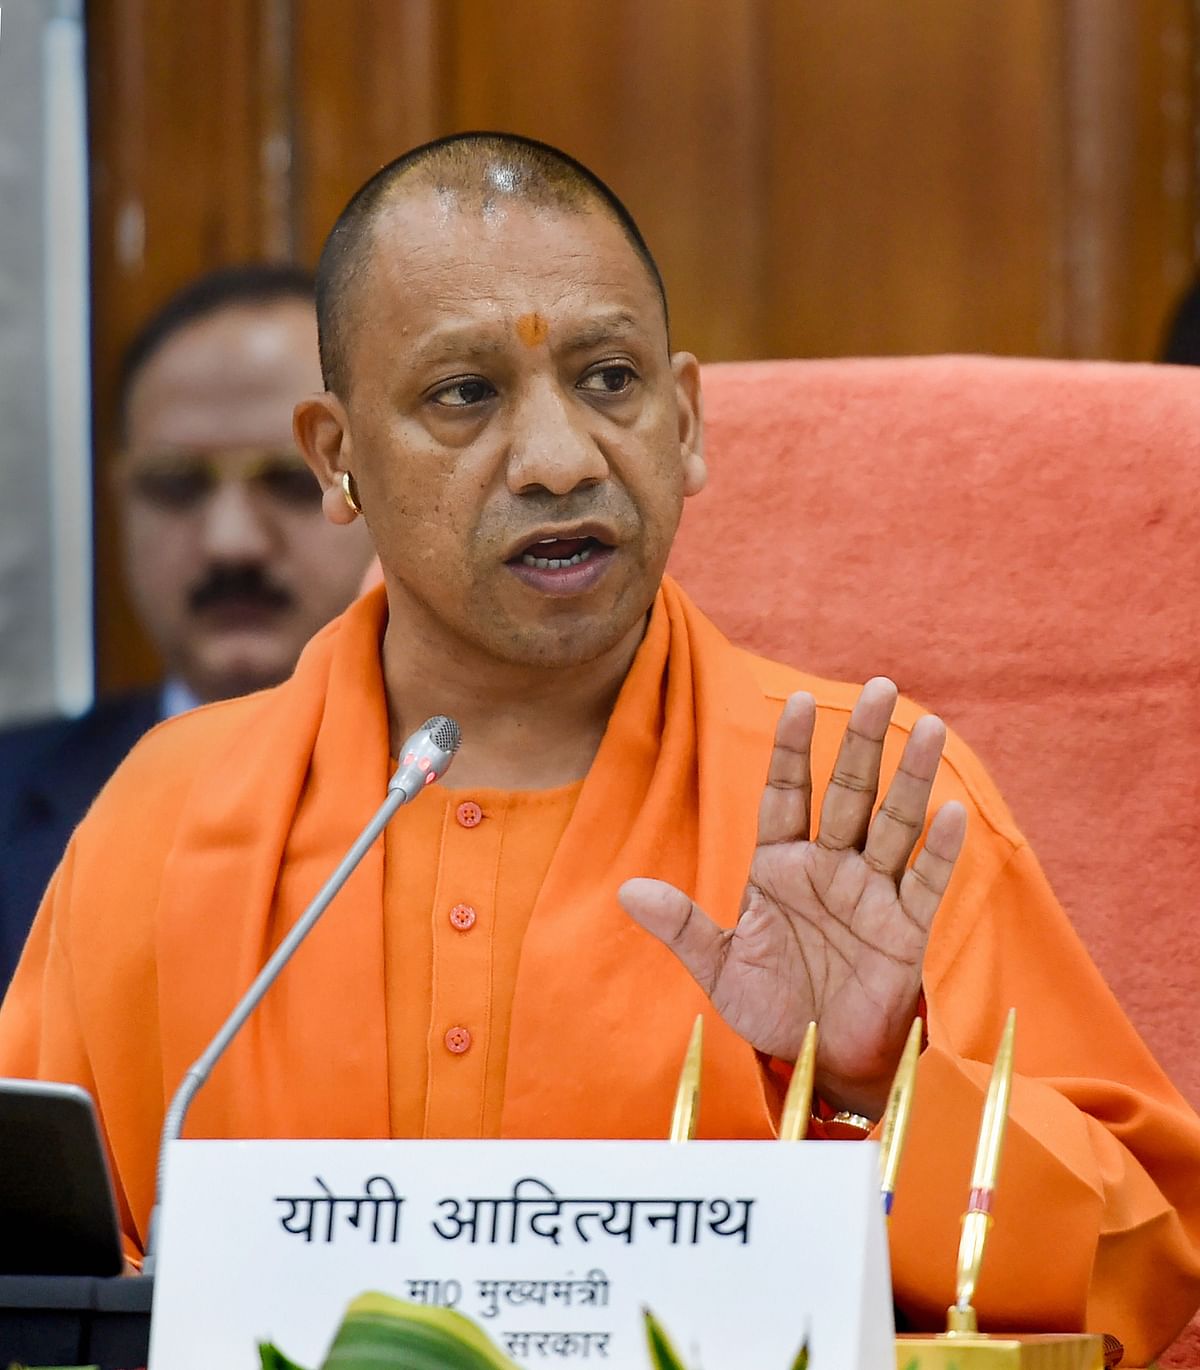 Raise daily Covid-19 testing to 1 lakh, conduct door-to-door survey in 7 dists: Yogi to officials